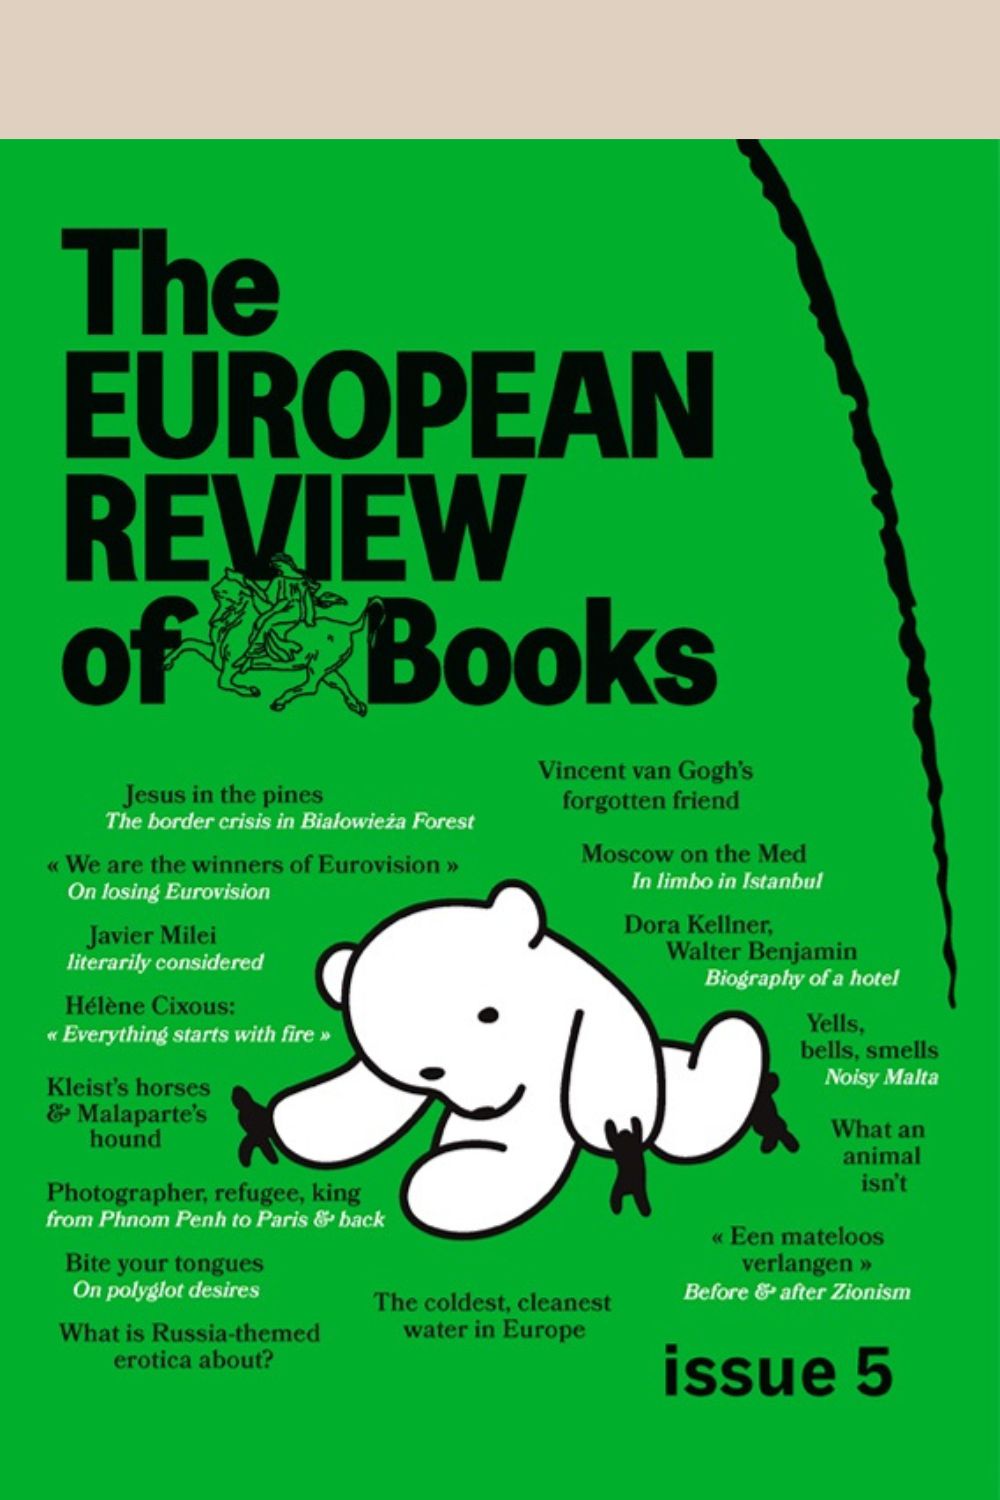 European Review of Books Issue 5 cover (green with teddy bear vignette)